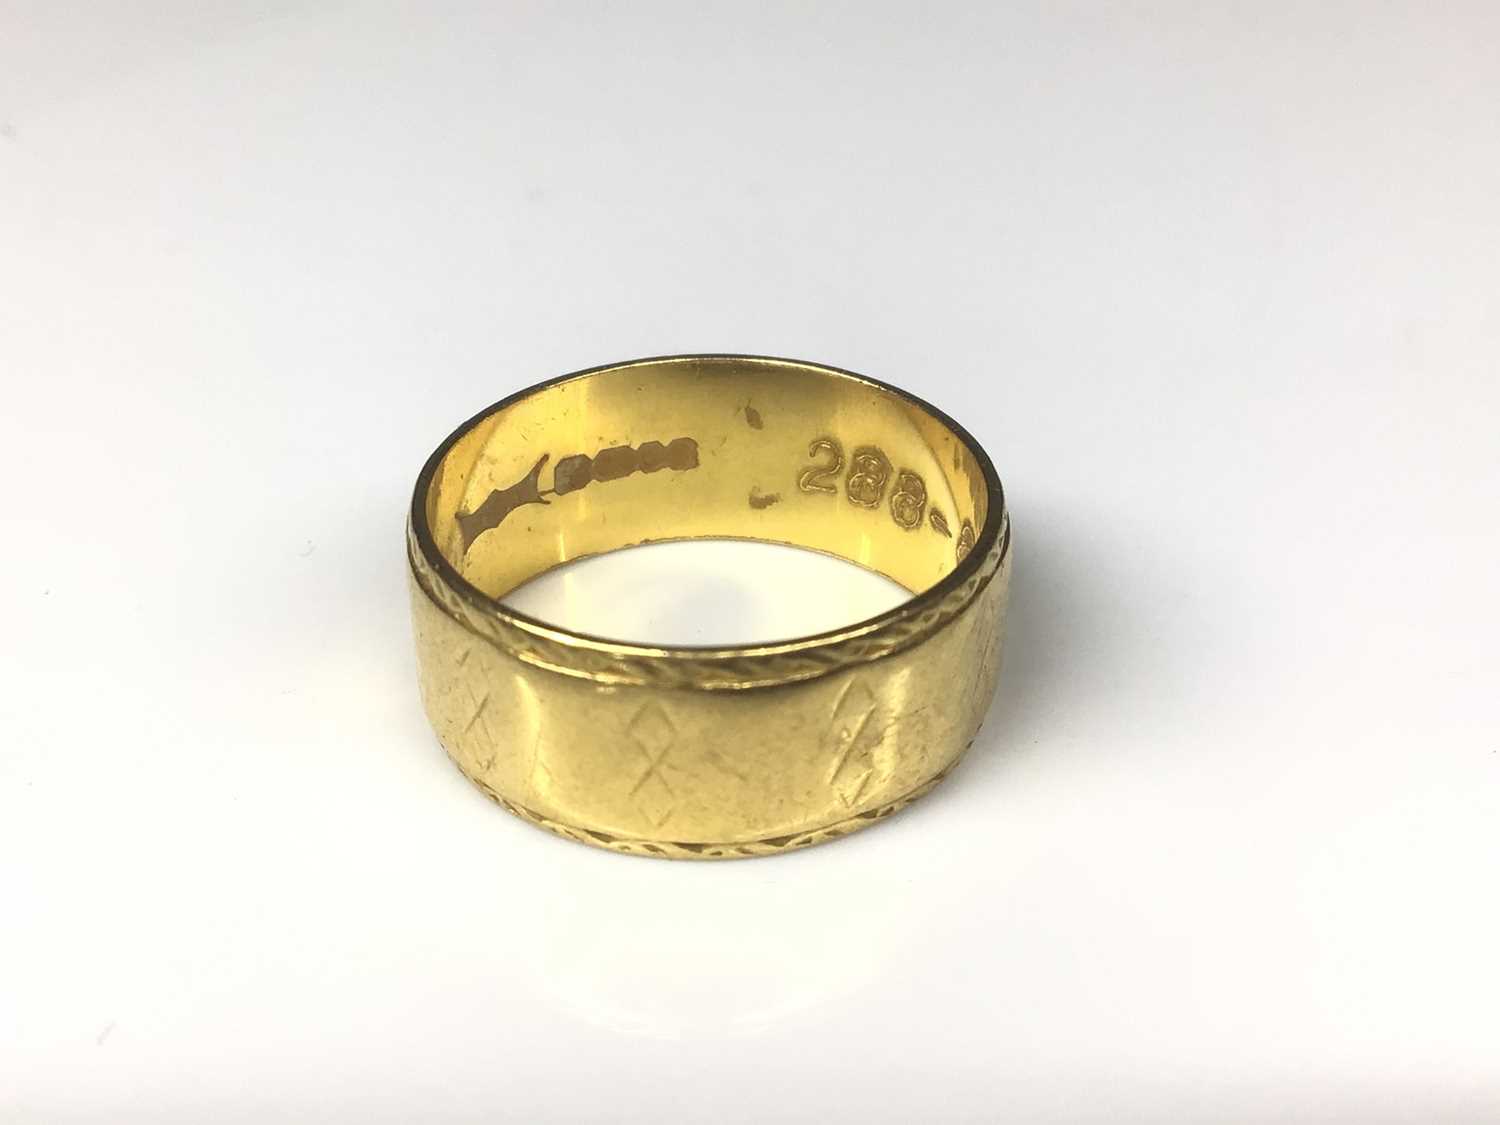 22ct gold wide band wedding ring with engraved geometric decoration - Image 2 of 2